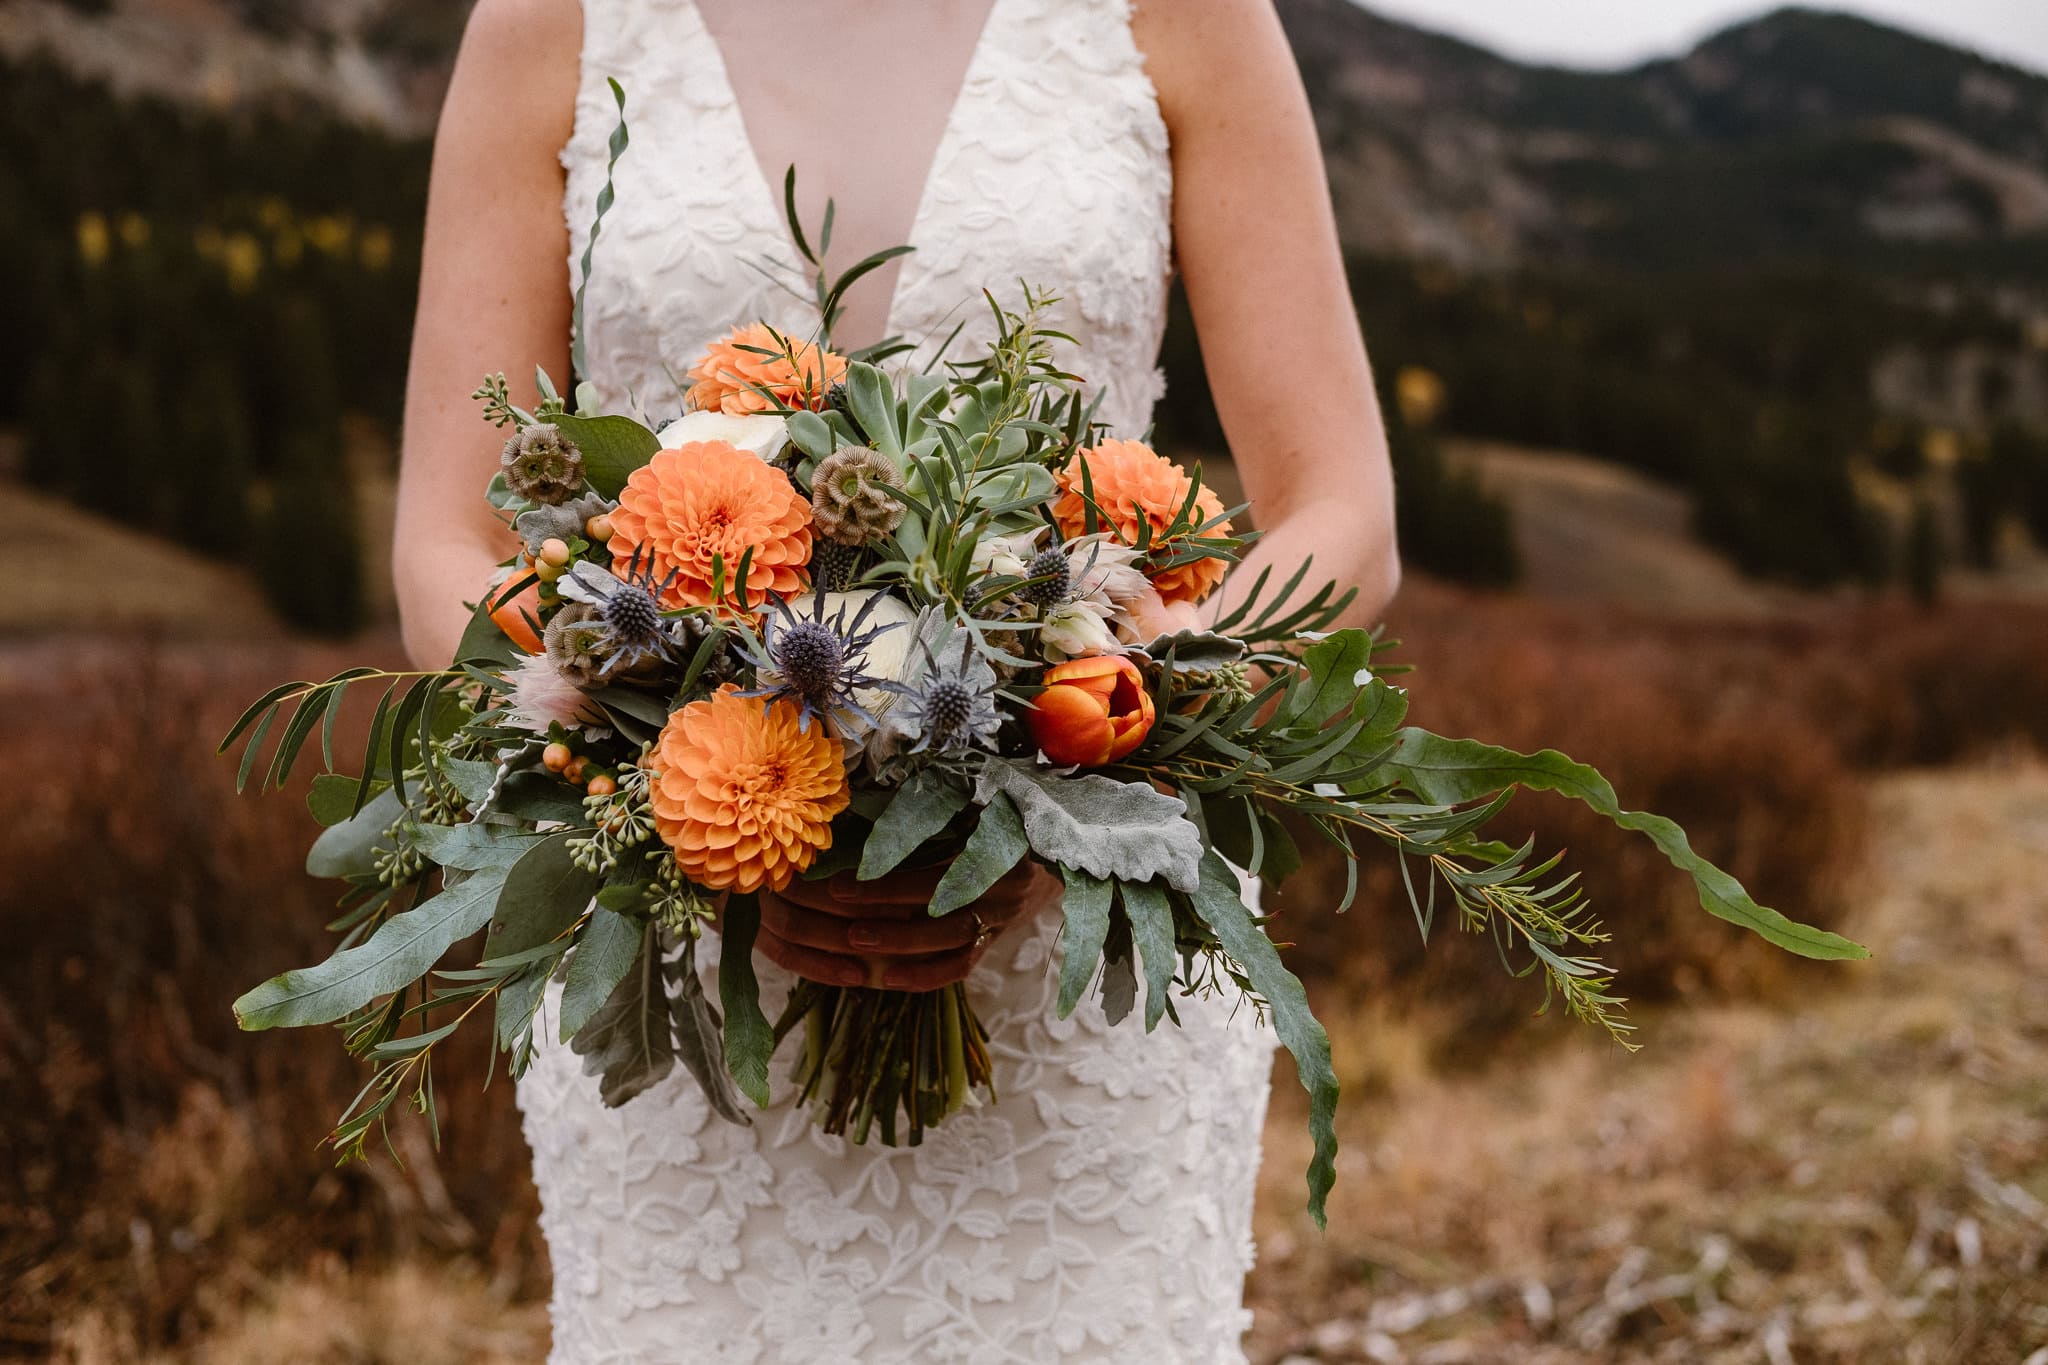 Crested Butte Wedding Photographer, Scarp Ridge Lodge intimate elopement, self solemnized elopement in Colorado, bride and groom portraits, Colorado mountain adventure wedding, bride wearing floral crown, fall color bouquet with orange flowers by From the Ground Up, wedding bouquet